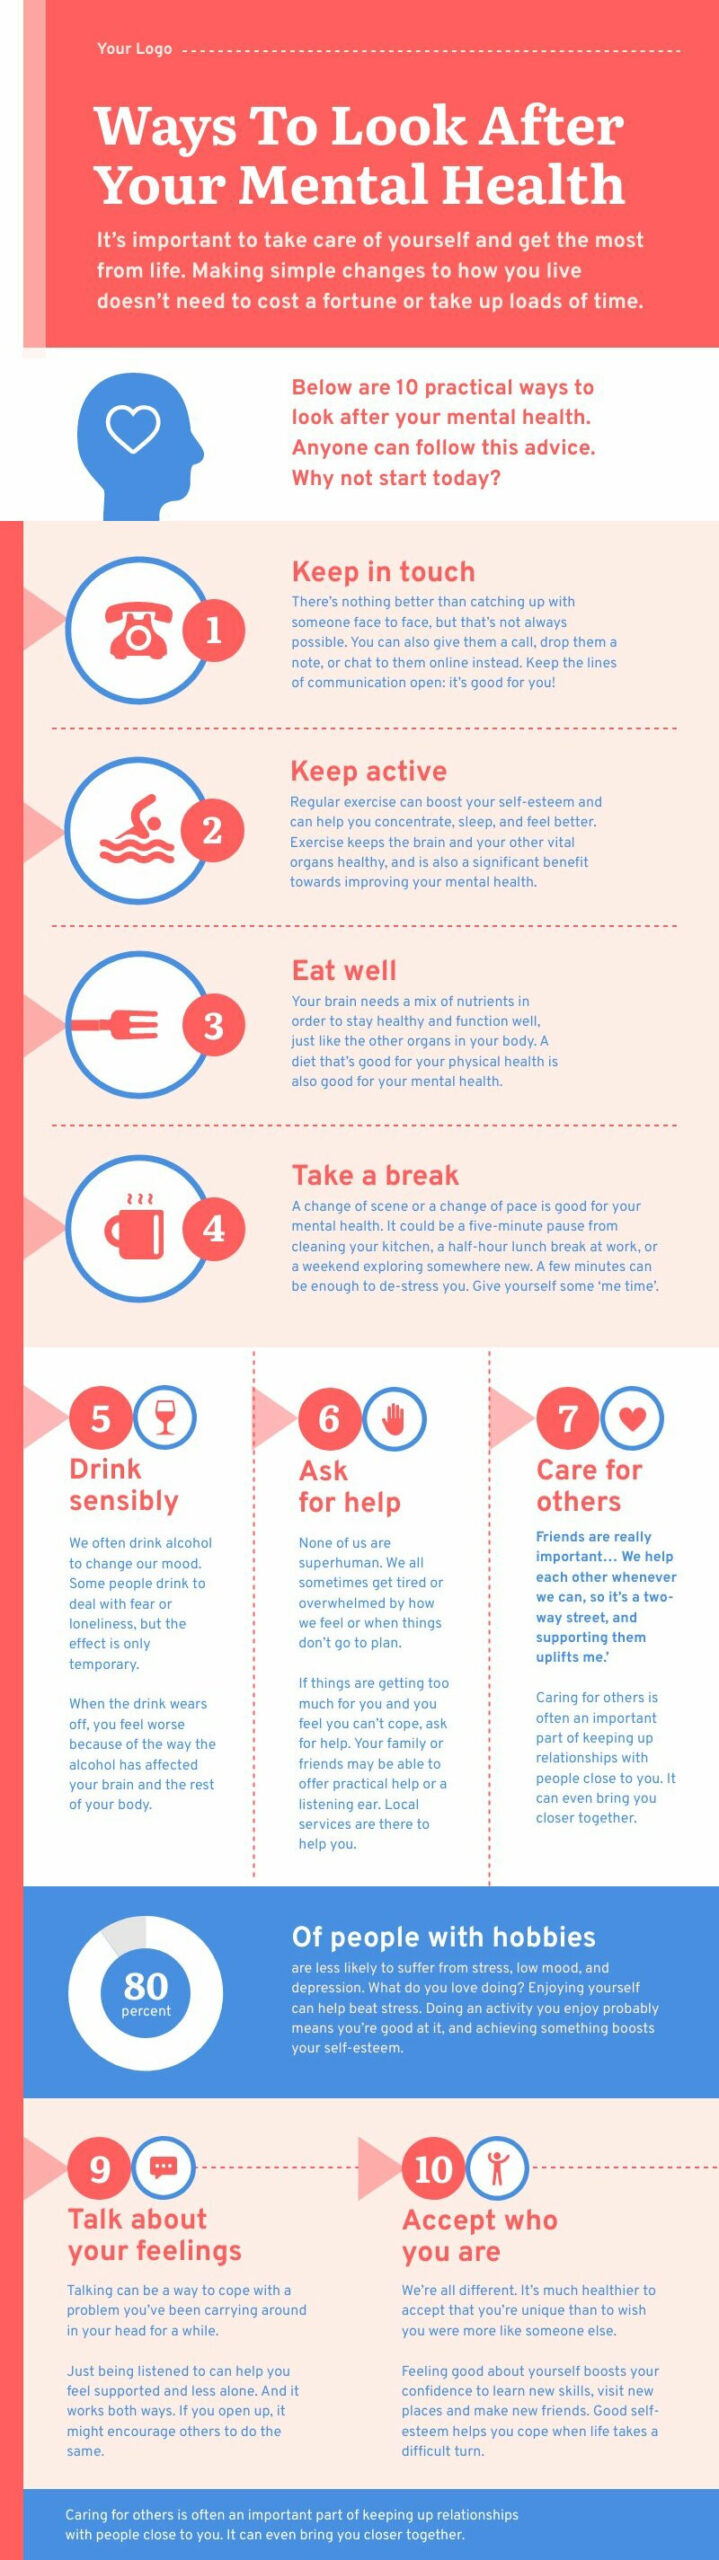 customizable infographic about mental health tips